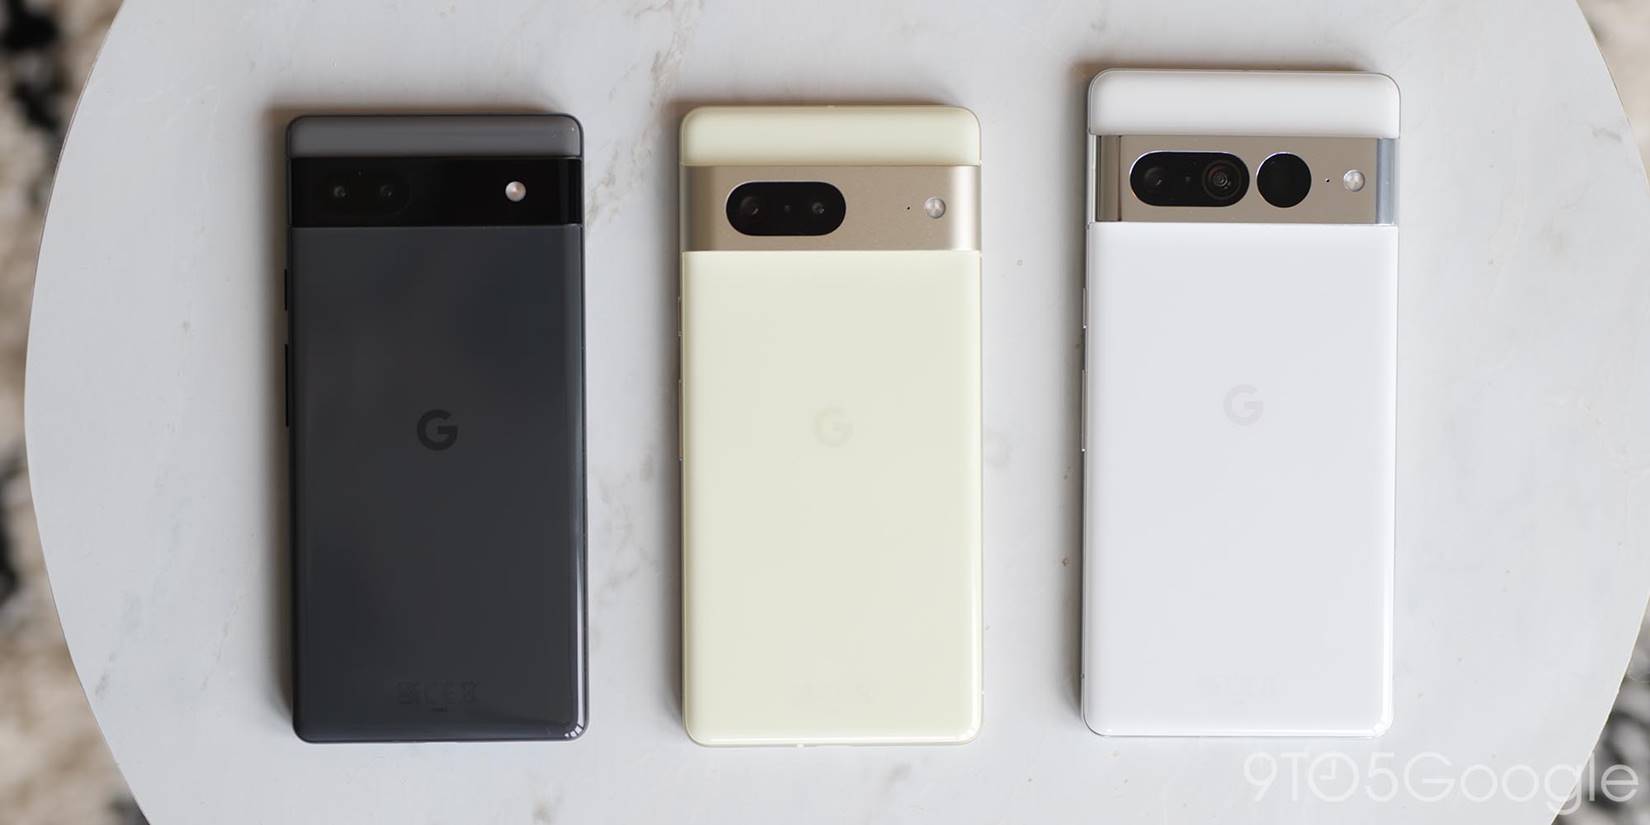 Google hasn't announced the Pixel 7A but someone already has it